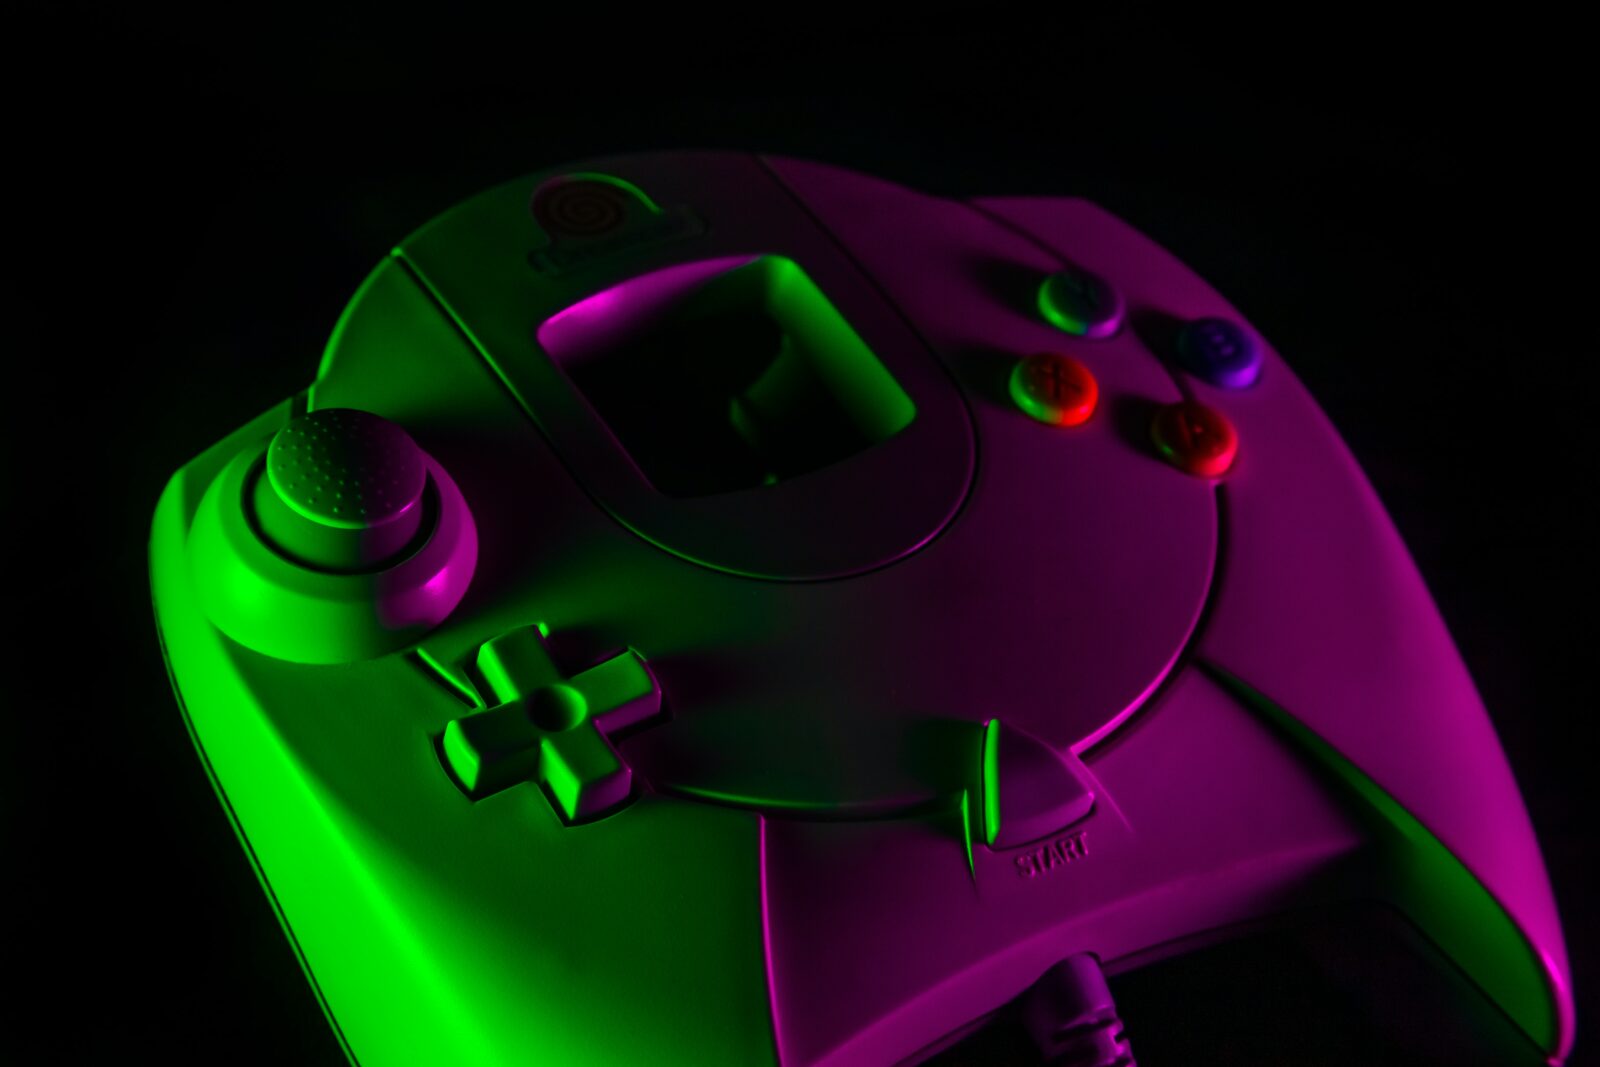 5 things the Dreamcast controller did better than other gamepads